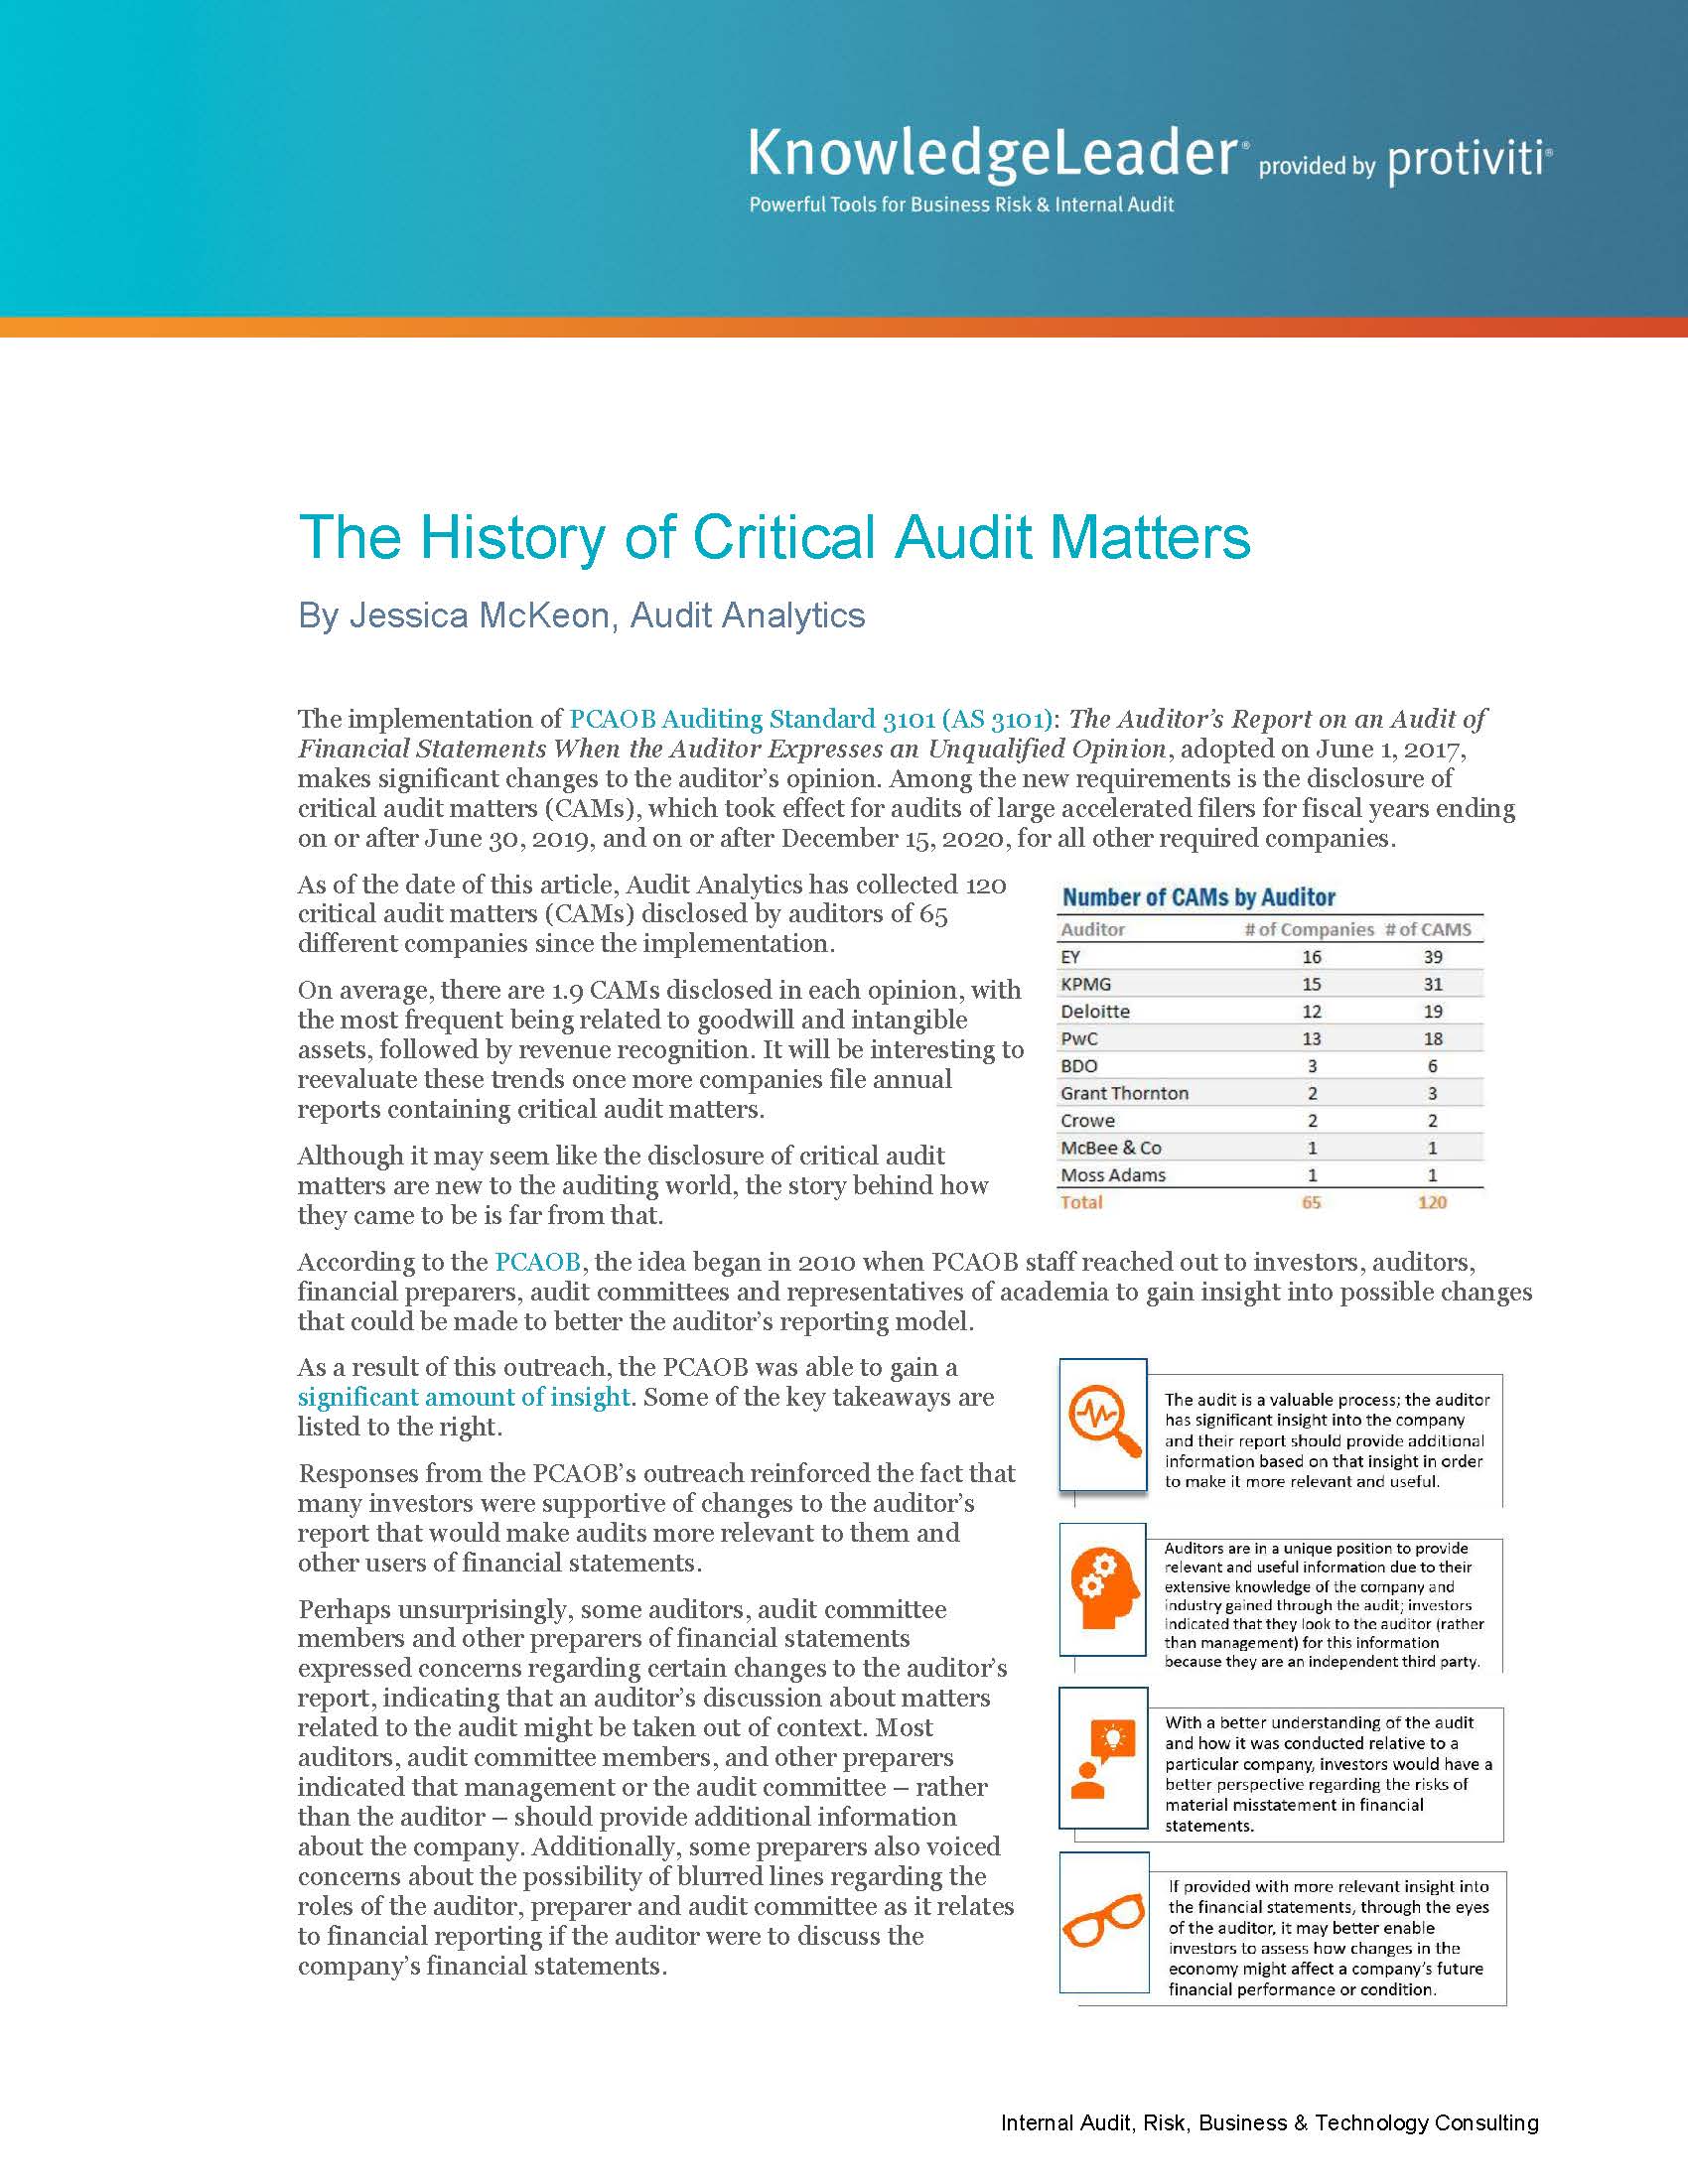 Screenshot of the first page of The History of Critical Audit Matter